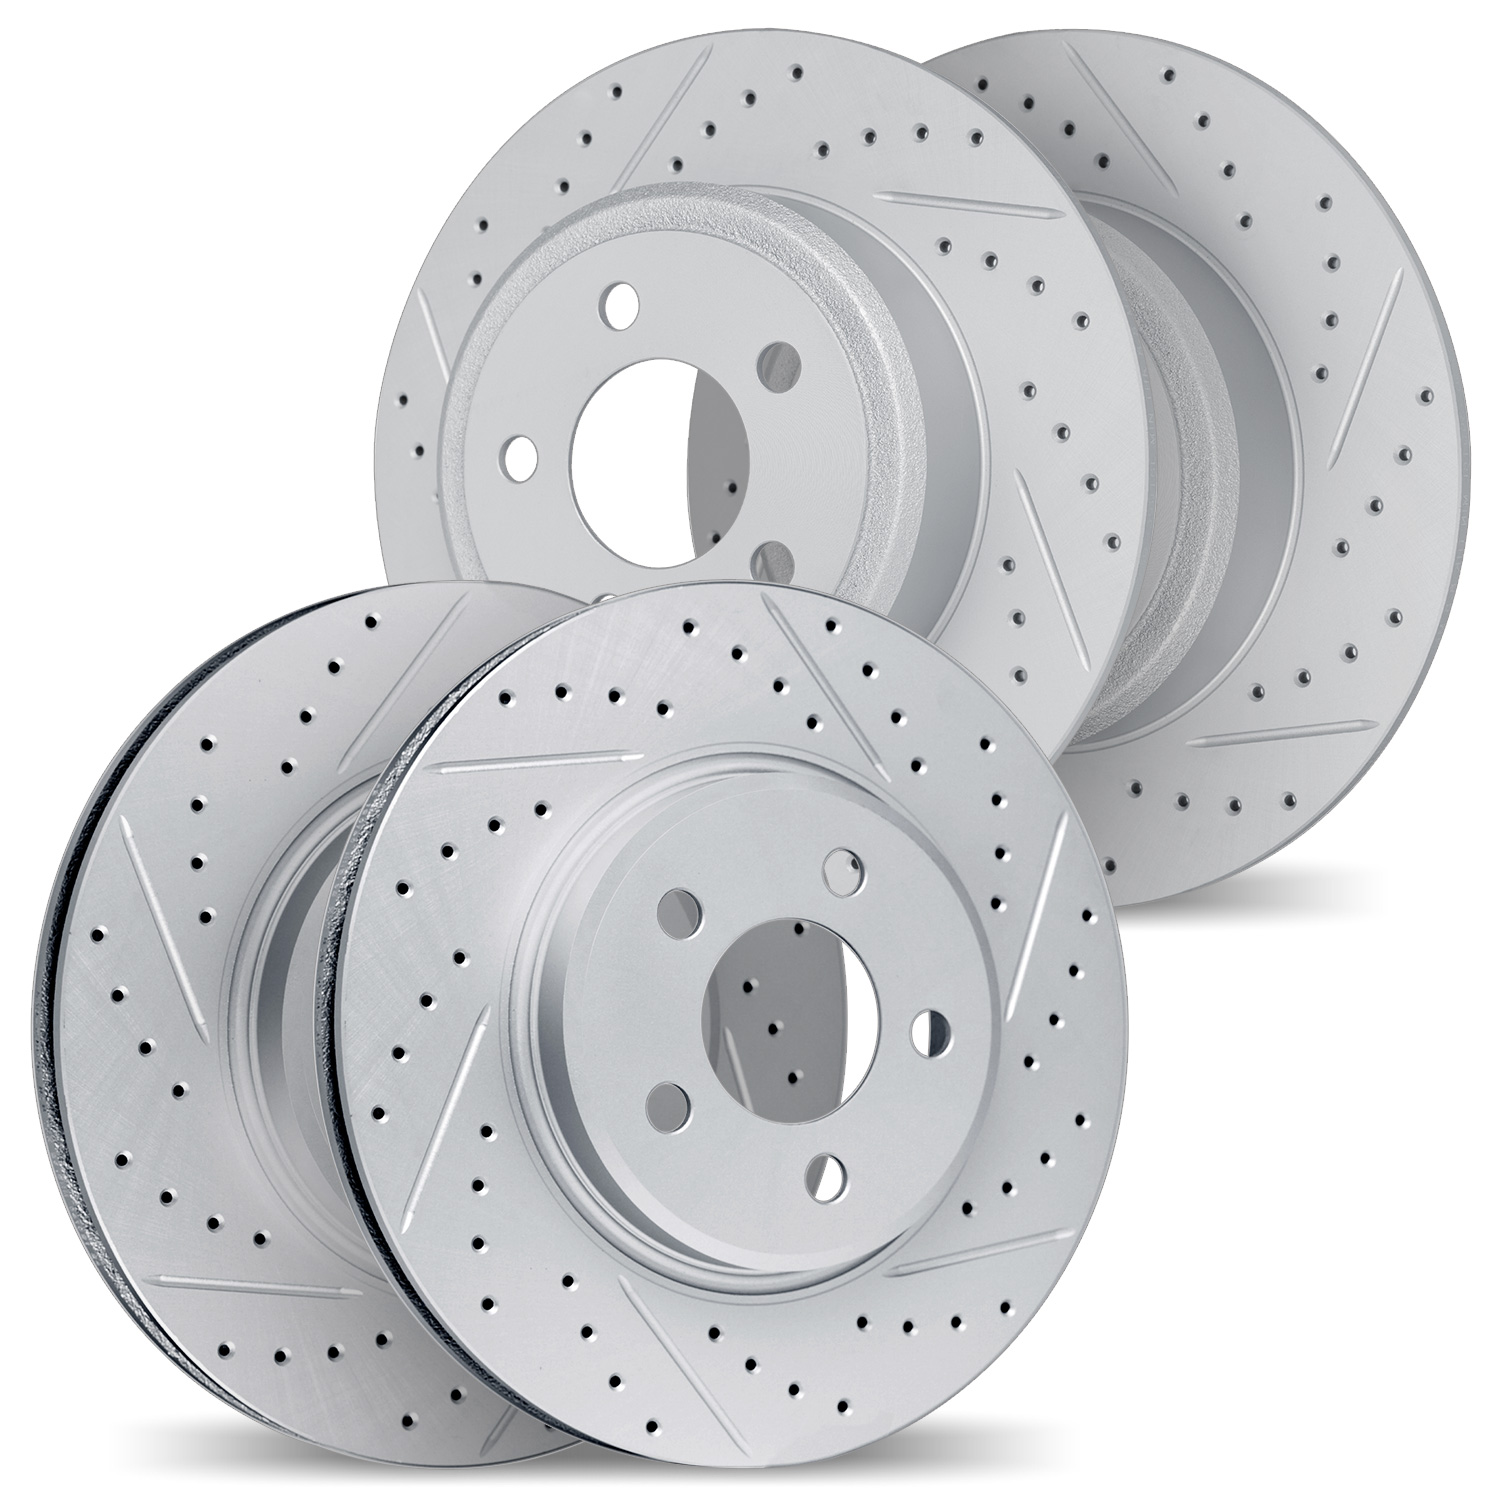 2004-59070 Geoperformance Drilled/Slotted Brake Rotors, 1997-2001 Acura/Honda, Position: Front and Rear